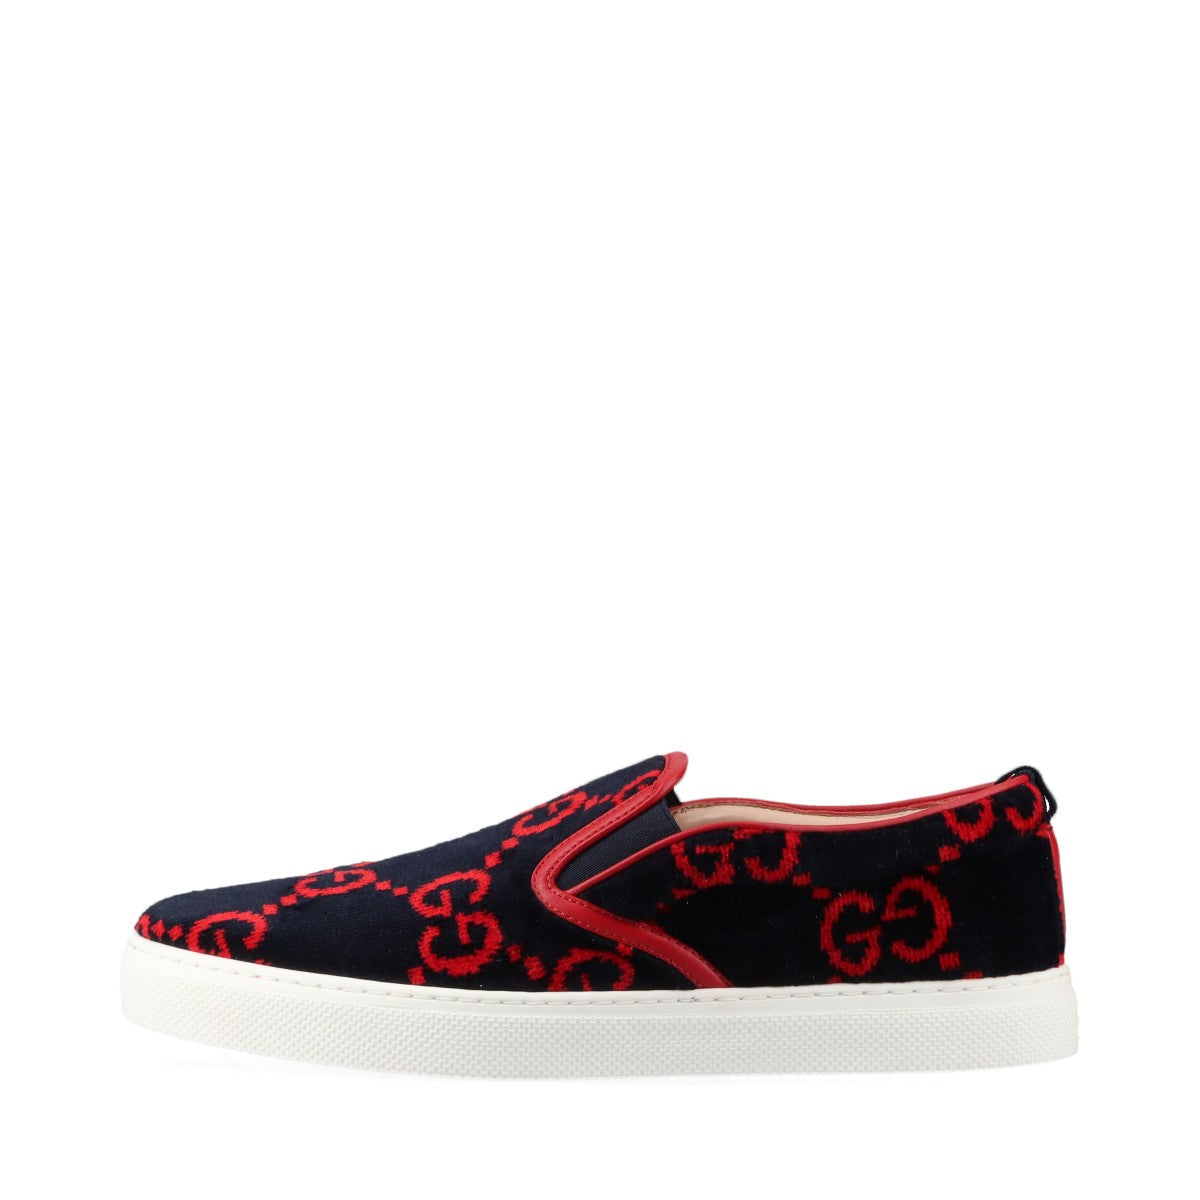 Gucci GG pattern Velour & leather Slip-on US9 1/2 Men's Navy x red 407363 There is a zero mark on the back of the shootang Family sale item box There is a bag